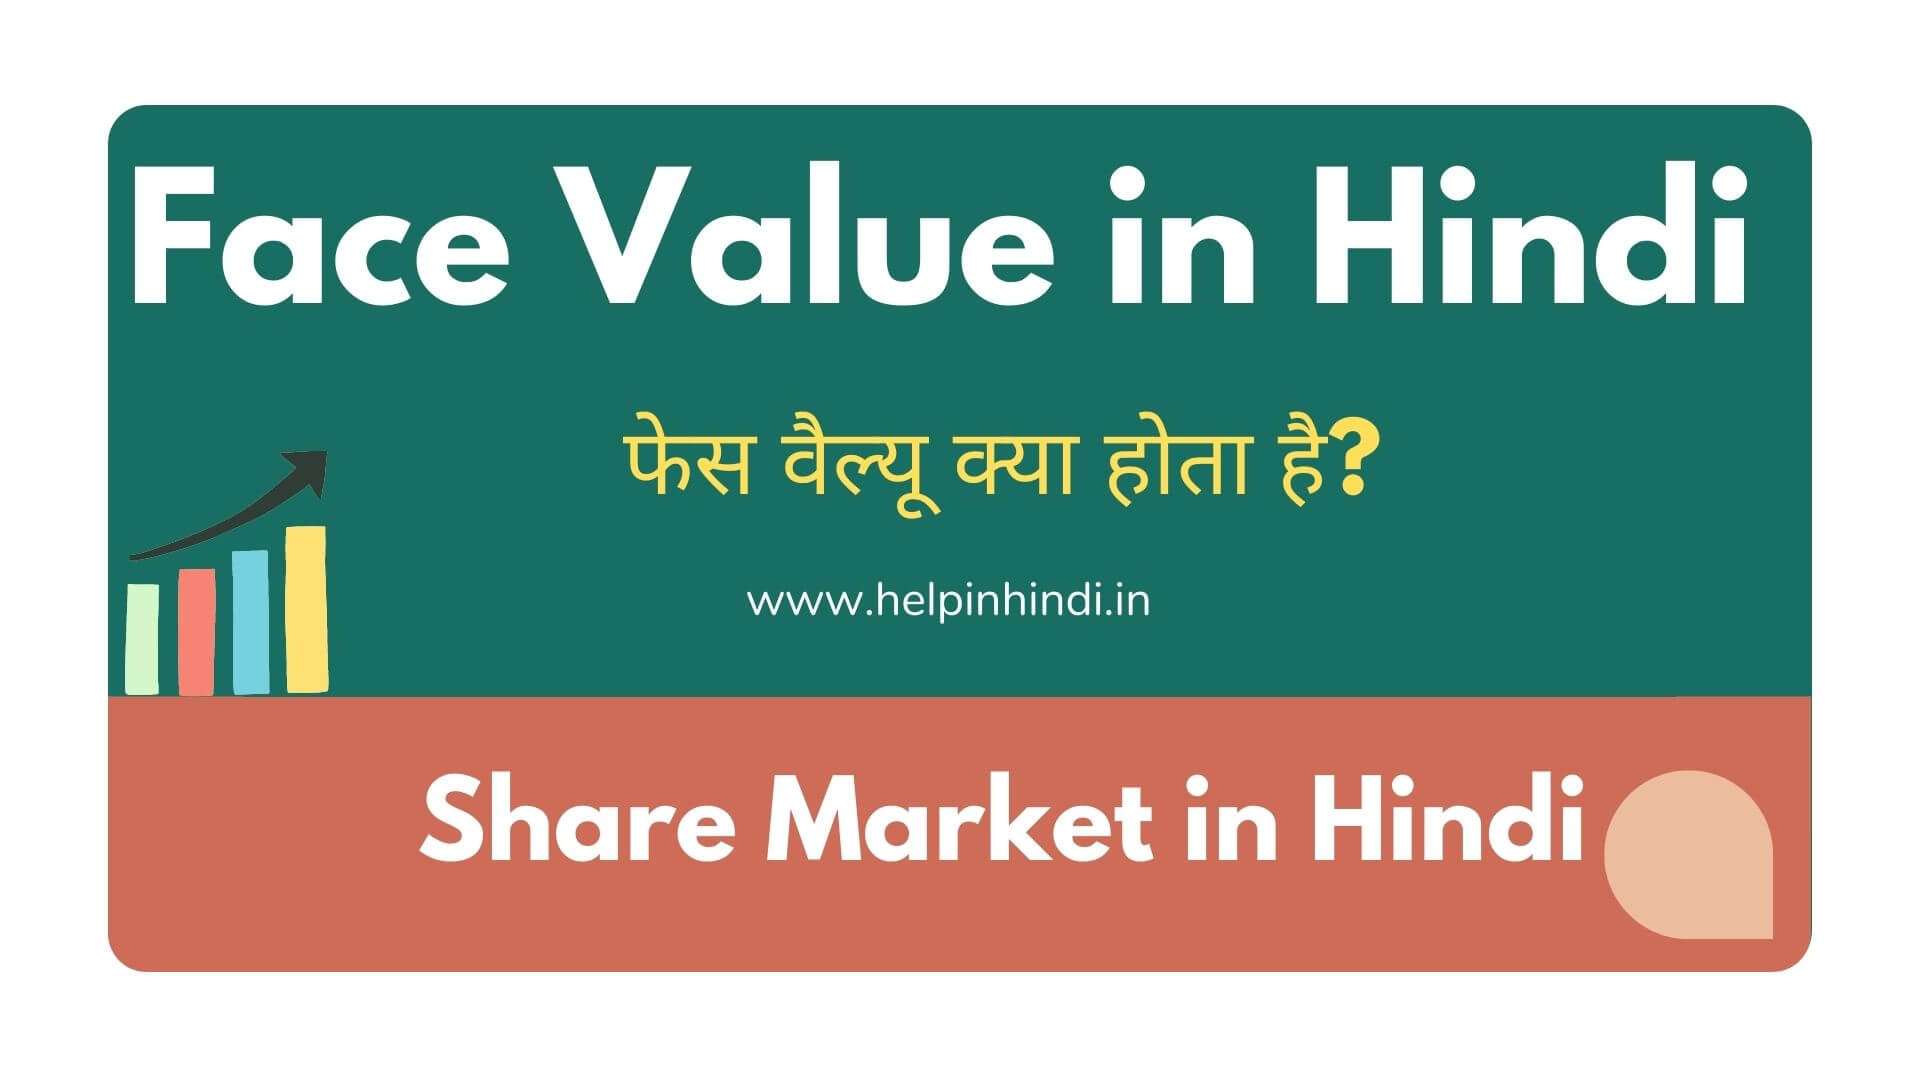 Face value in Hindi